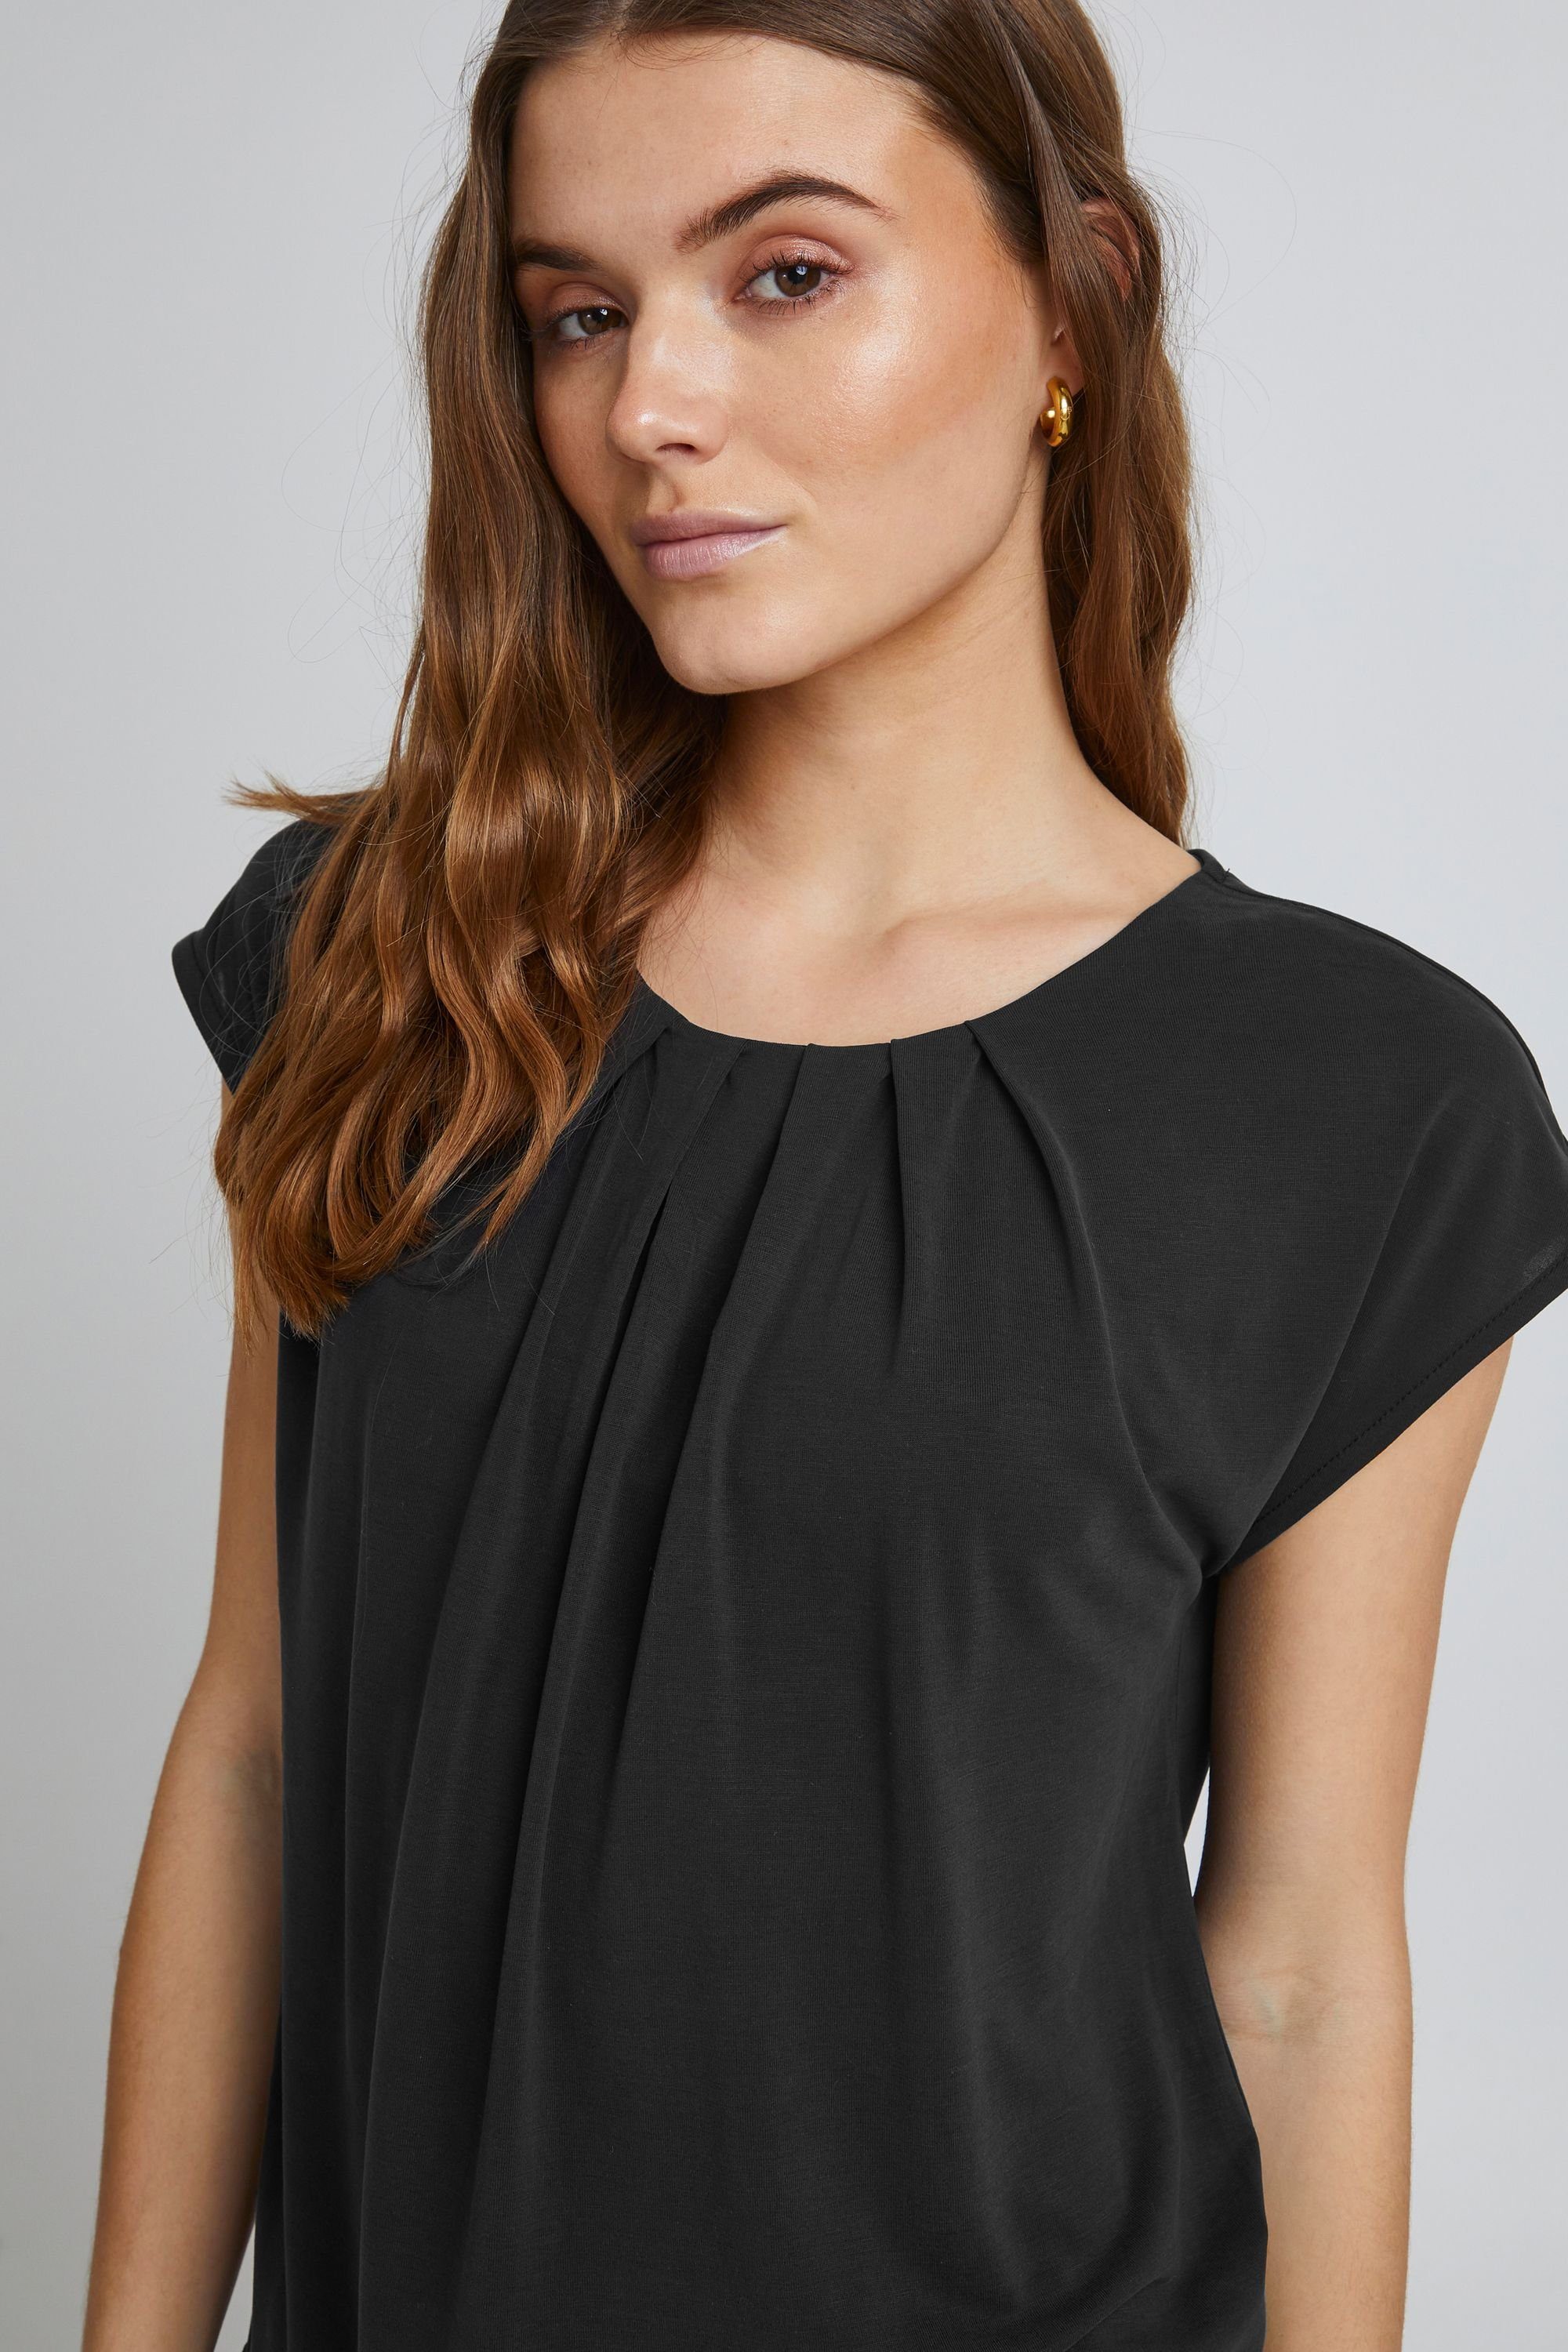 TOP BYPERL (200451) b.young -20811284 Black Shirtbluse